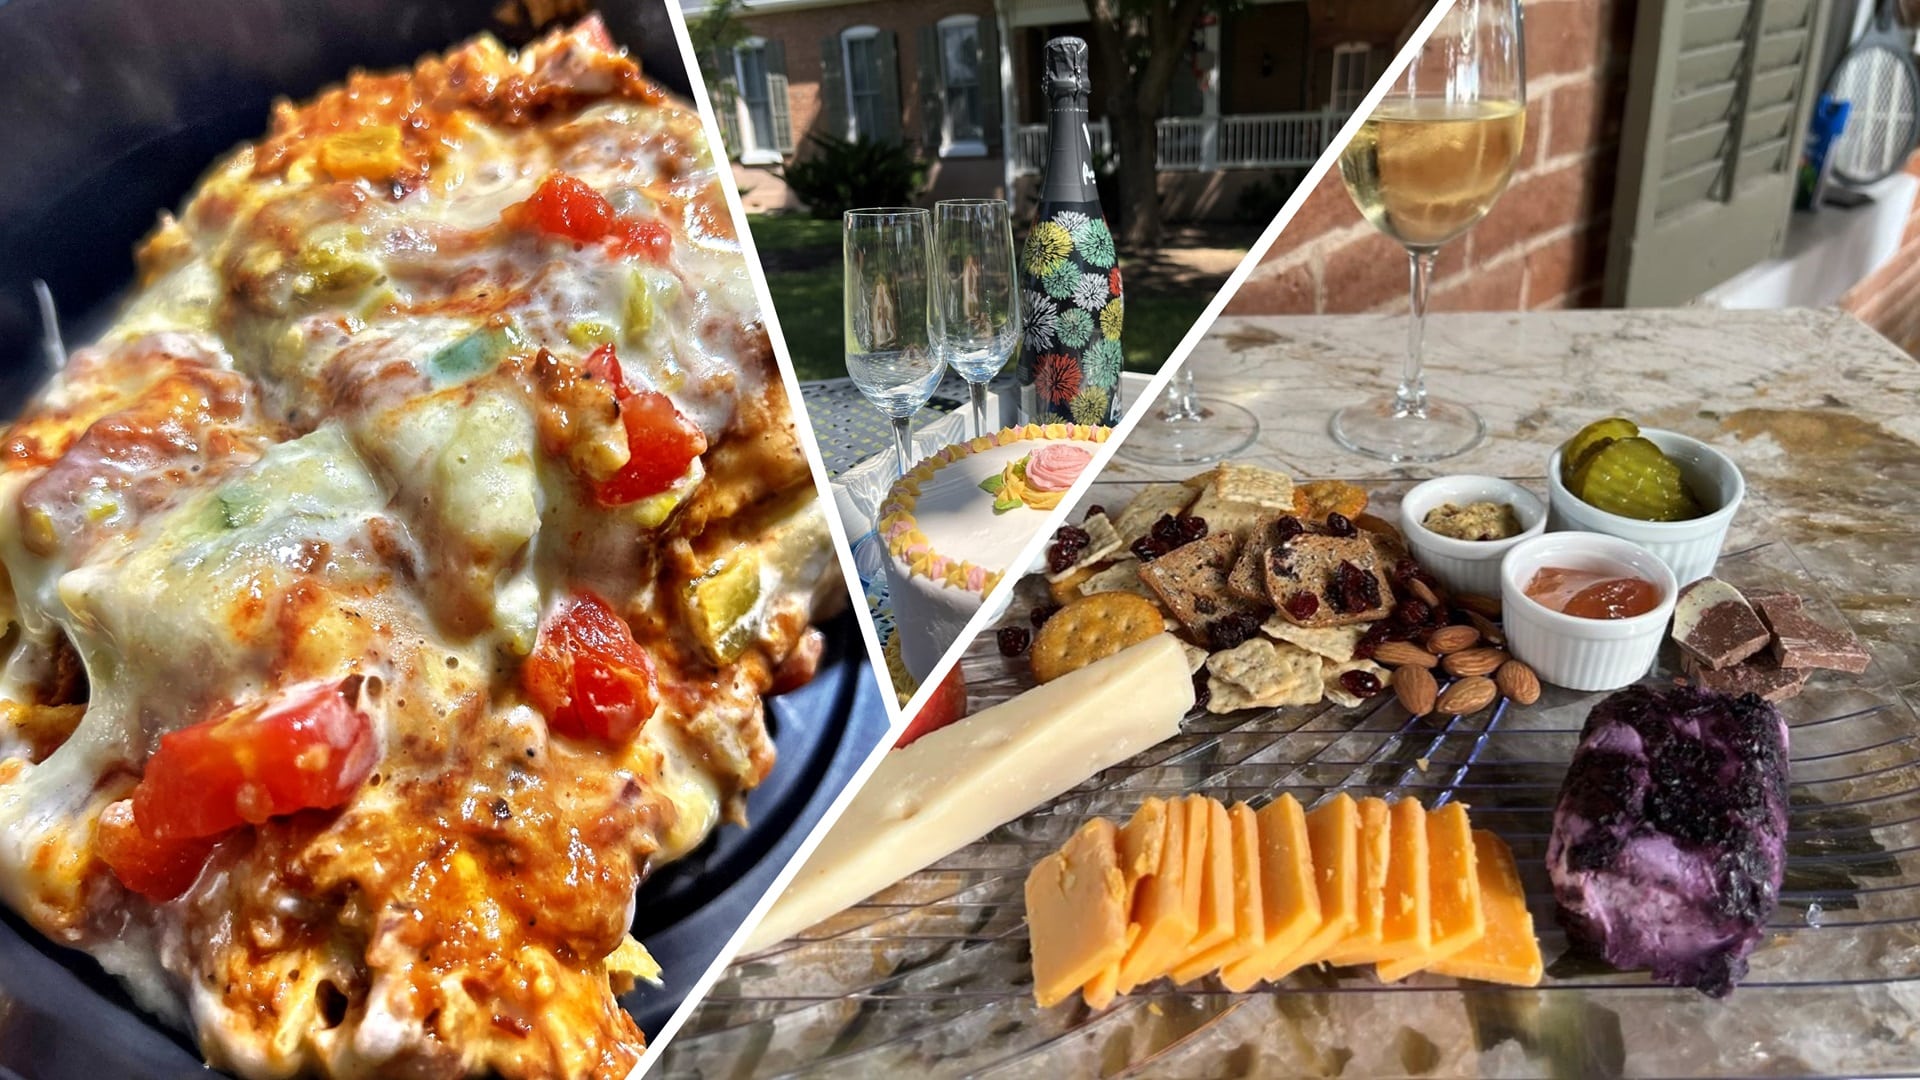 A collage of 3 pictures. One has what looks like hot enchiladas with gooey cheese and diced tomatoes. One has a cake with a bottle of champagne and two champagne flutes. One has a cheese board with 3 cheeses, wine, pickles, crackers, and chocolate.